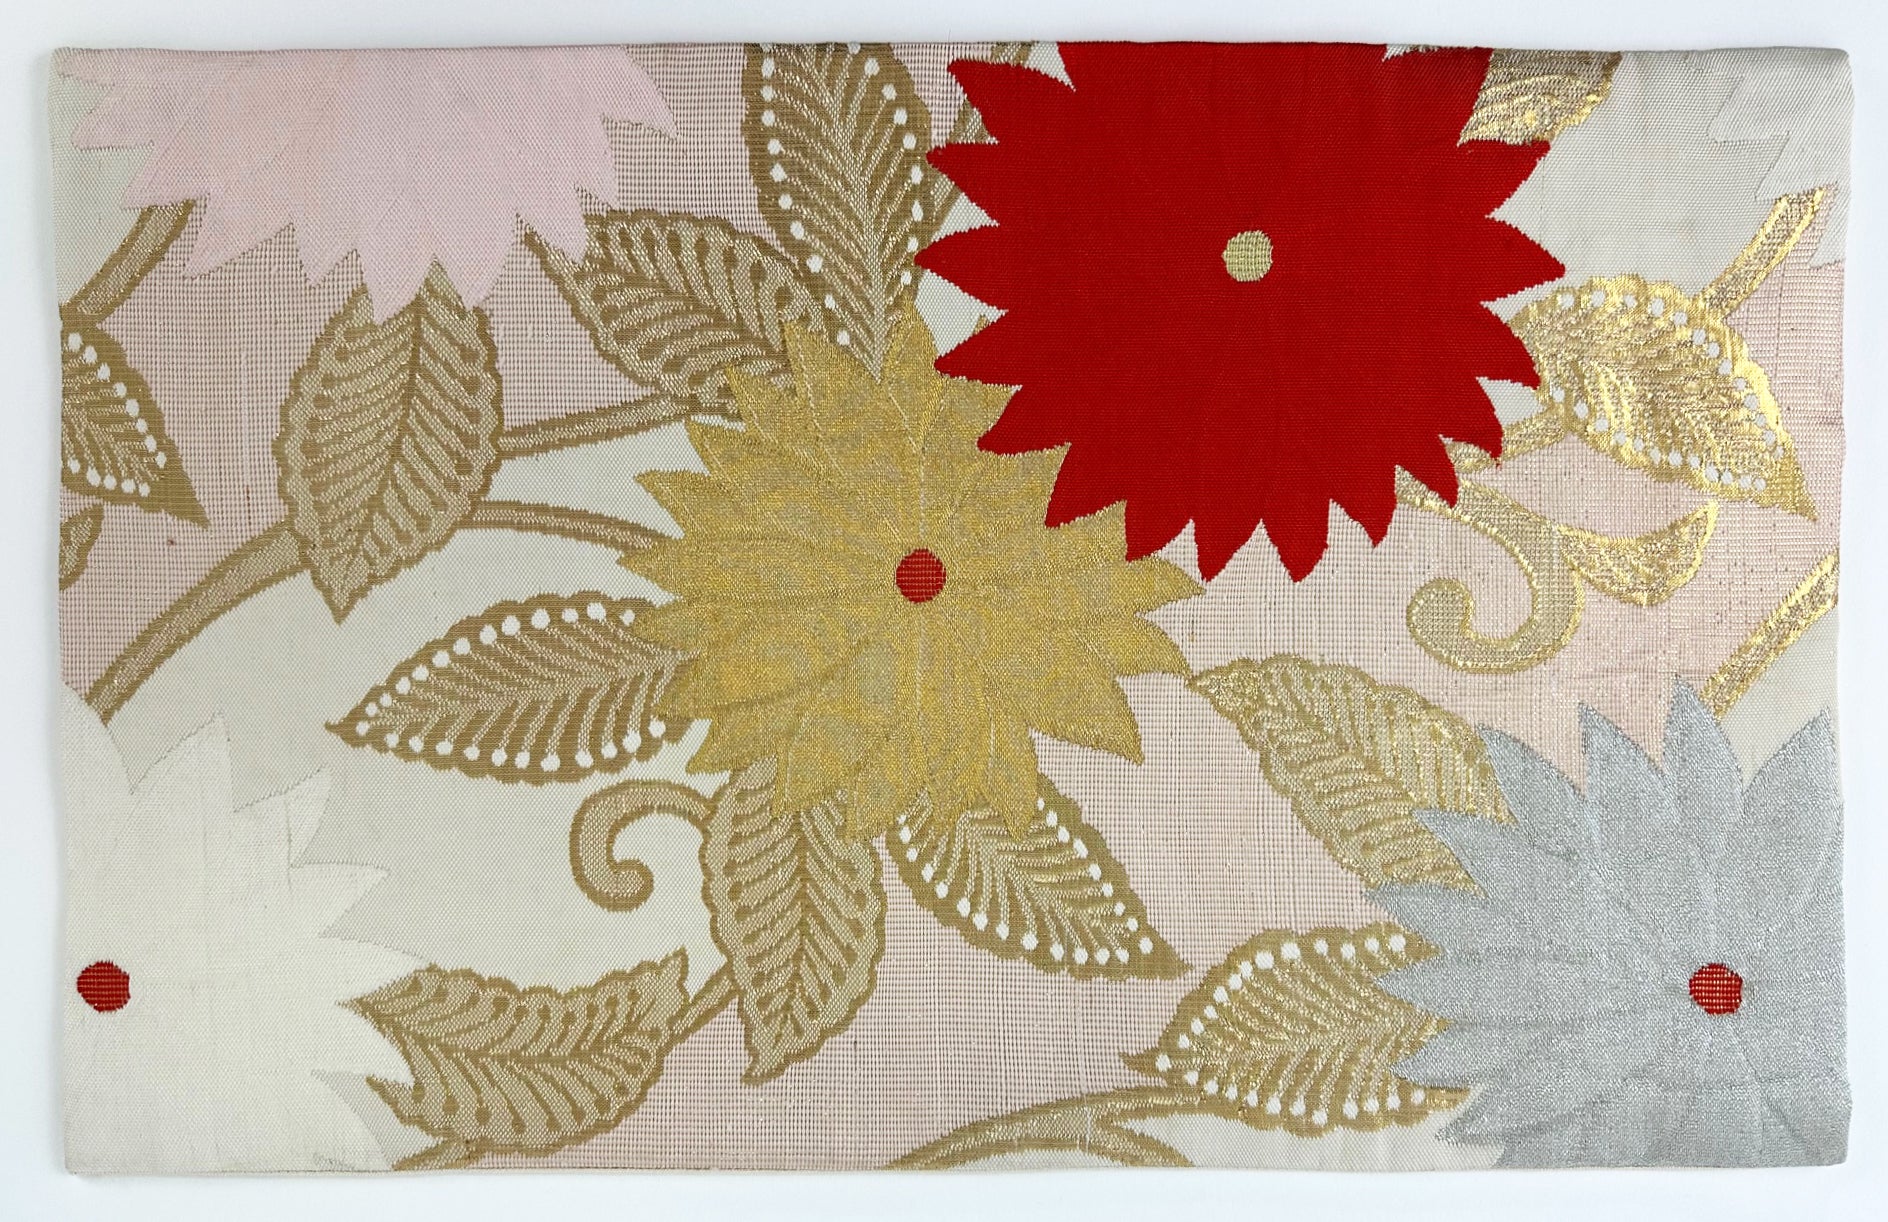 Lotus Flower Design with Kimono Fabric Mat for Altar Deco or Kyo Table